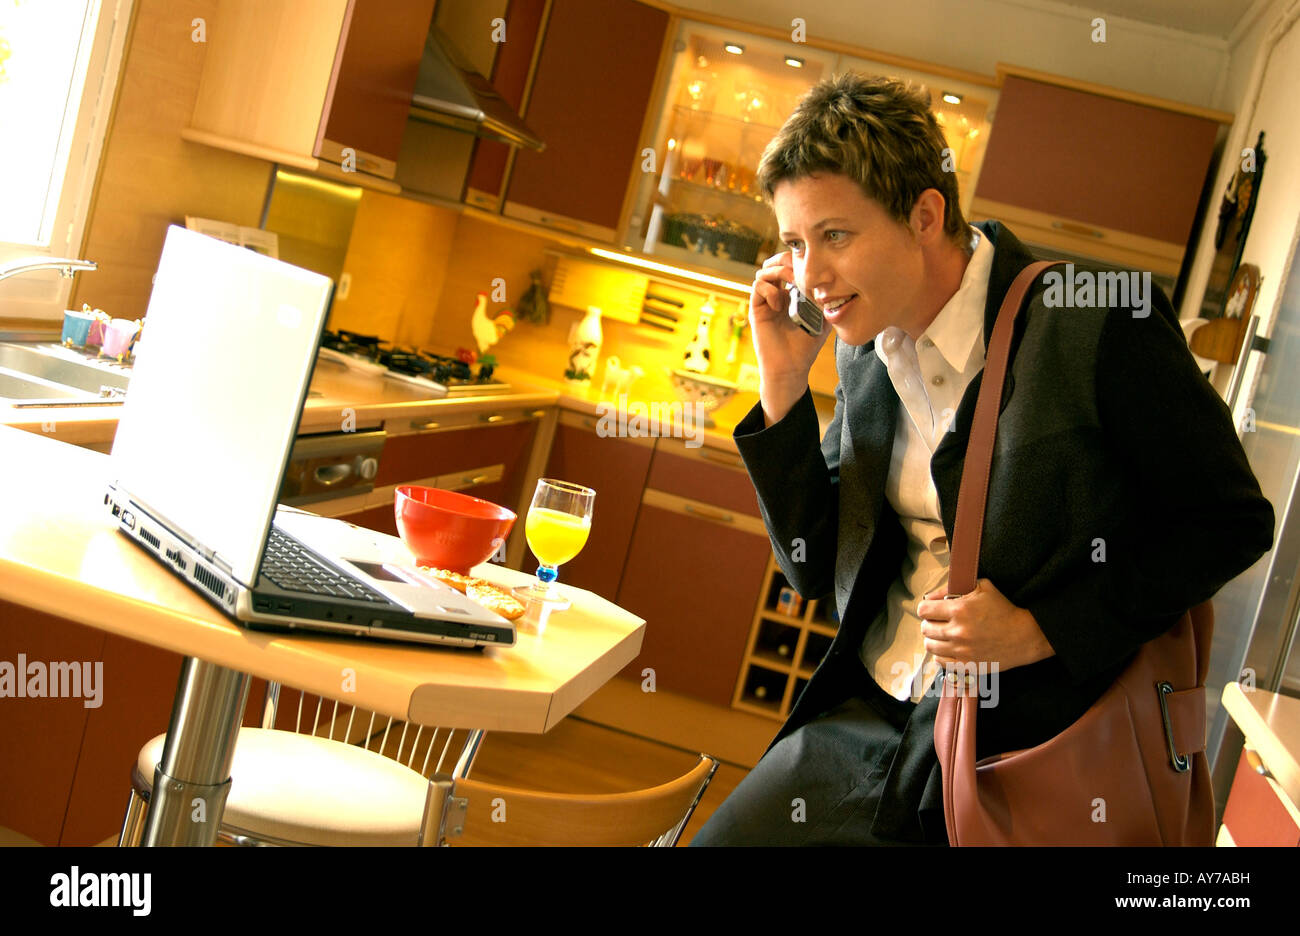 Businesswoman multitasking on phone with computer laptop in the kitchen in the morning rush after breakfast Stock Photo